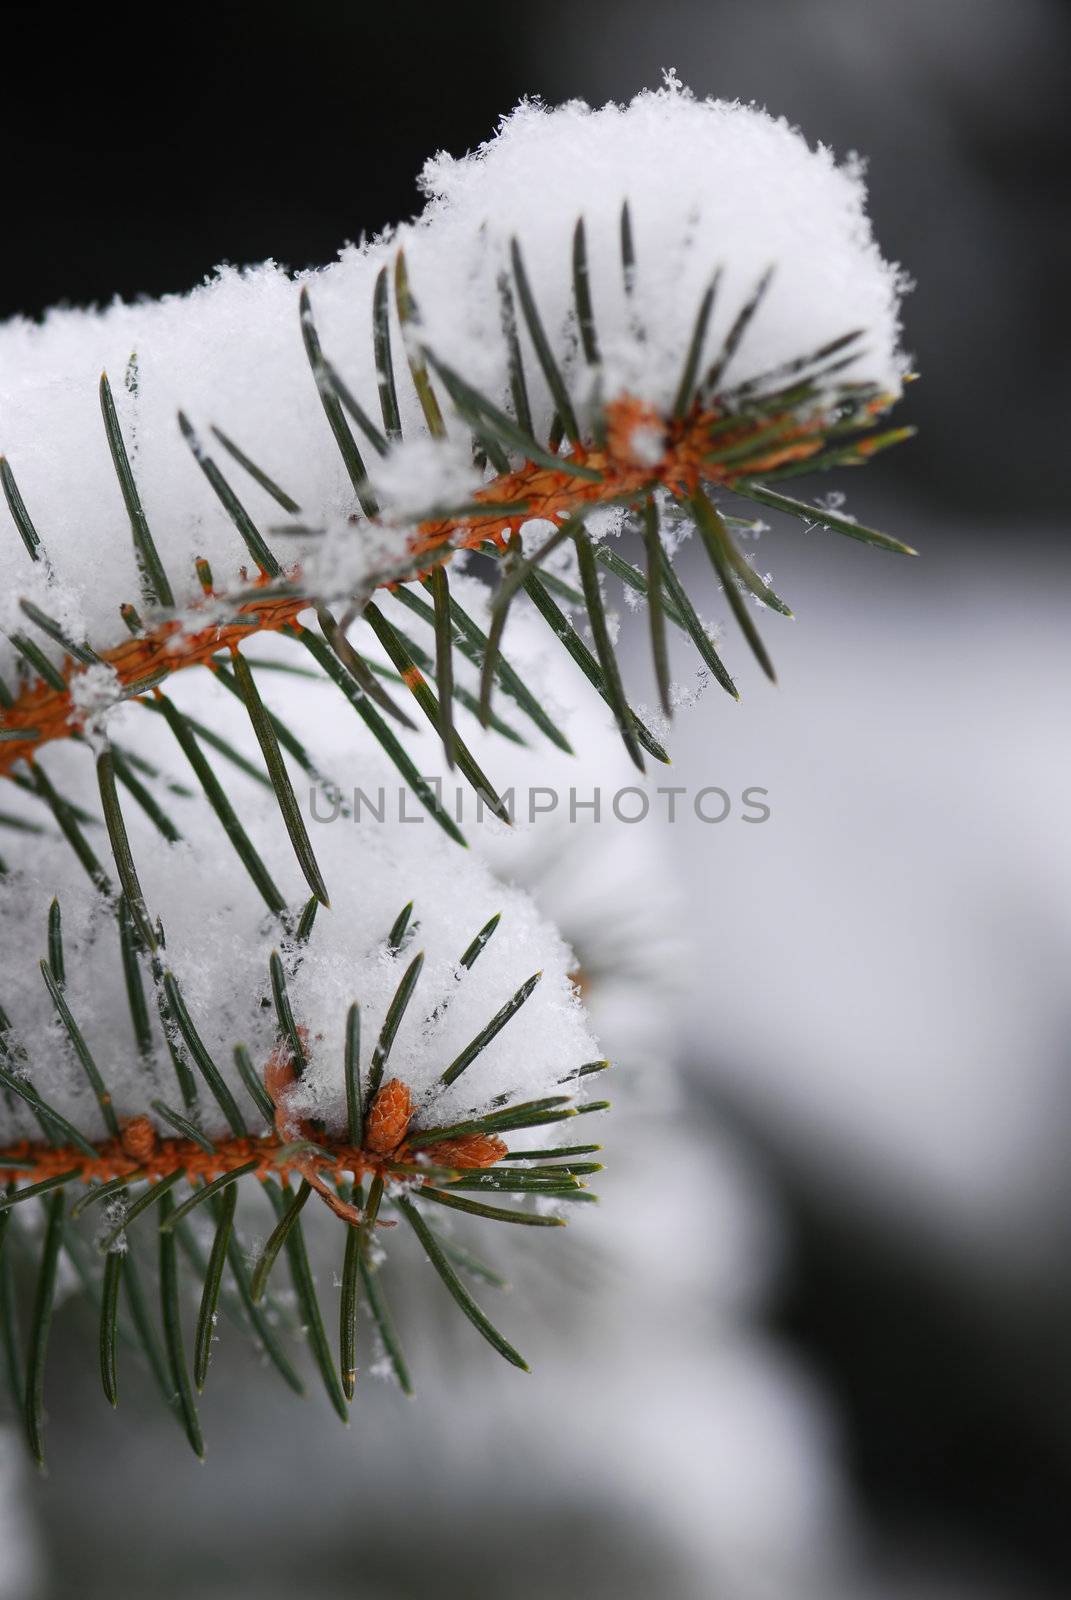 Snowy spruce branches by elenathewise